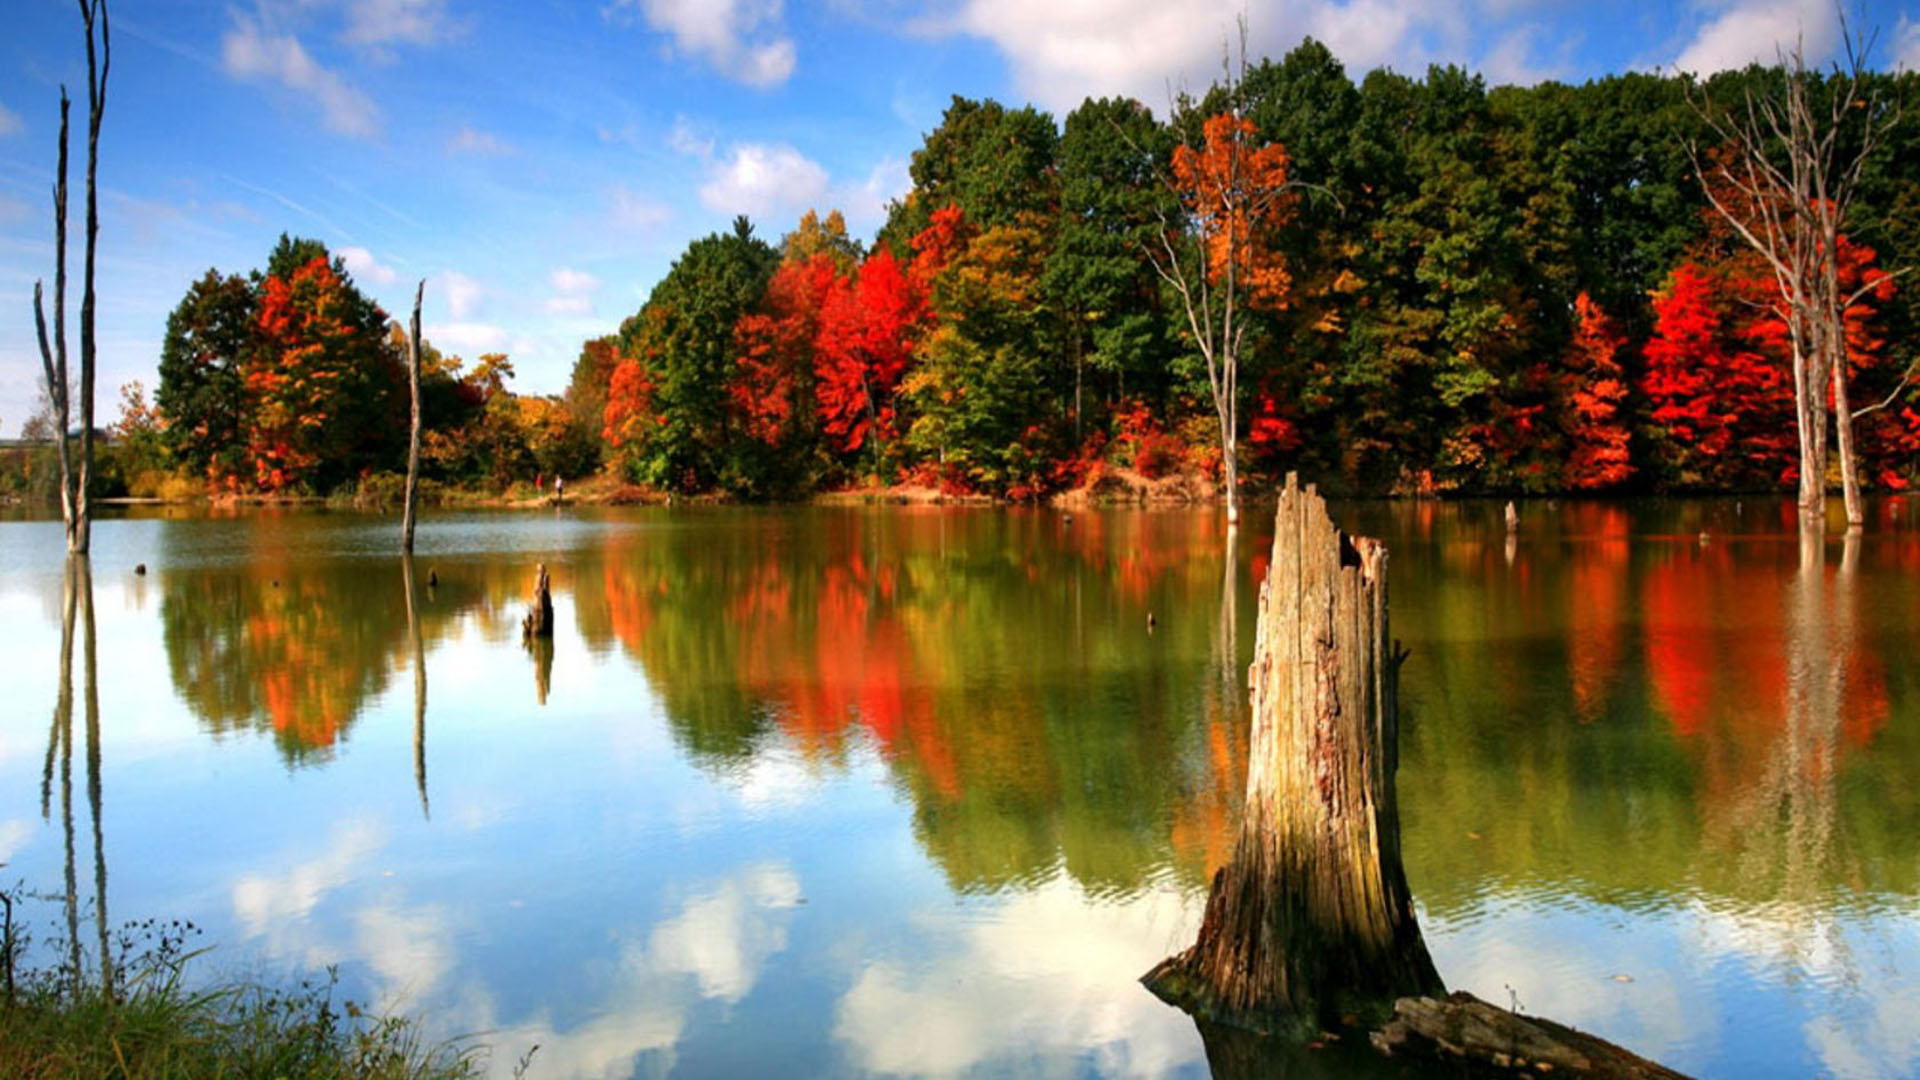 Green Red Orange Autumn Fall Trees In White Clouds Blue Sky Reflection On Water HD Autumn Desktop